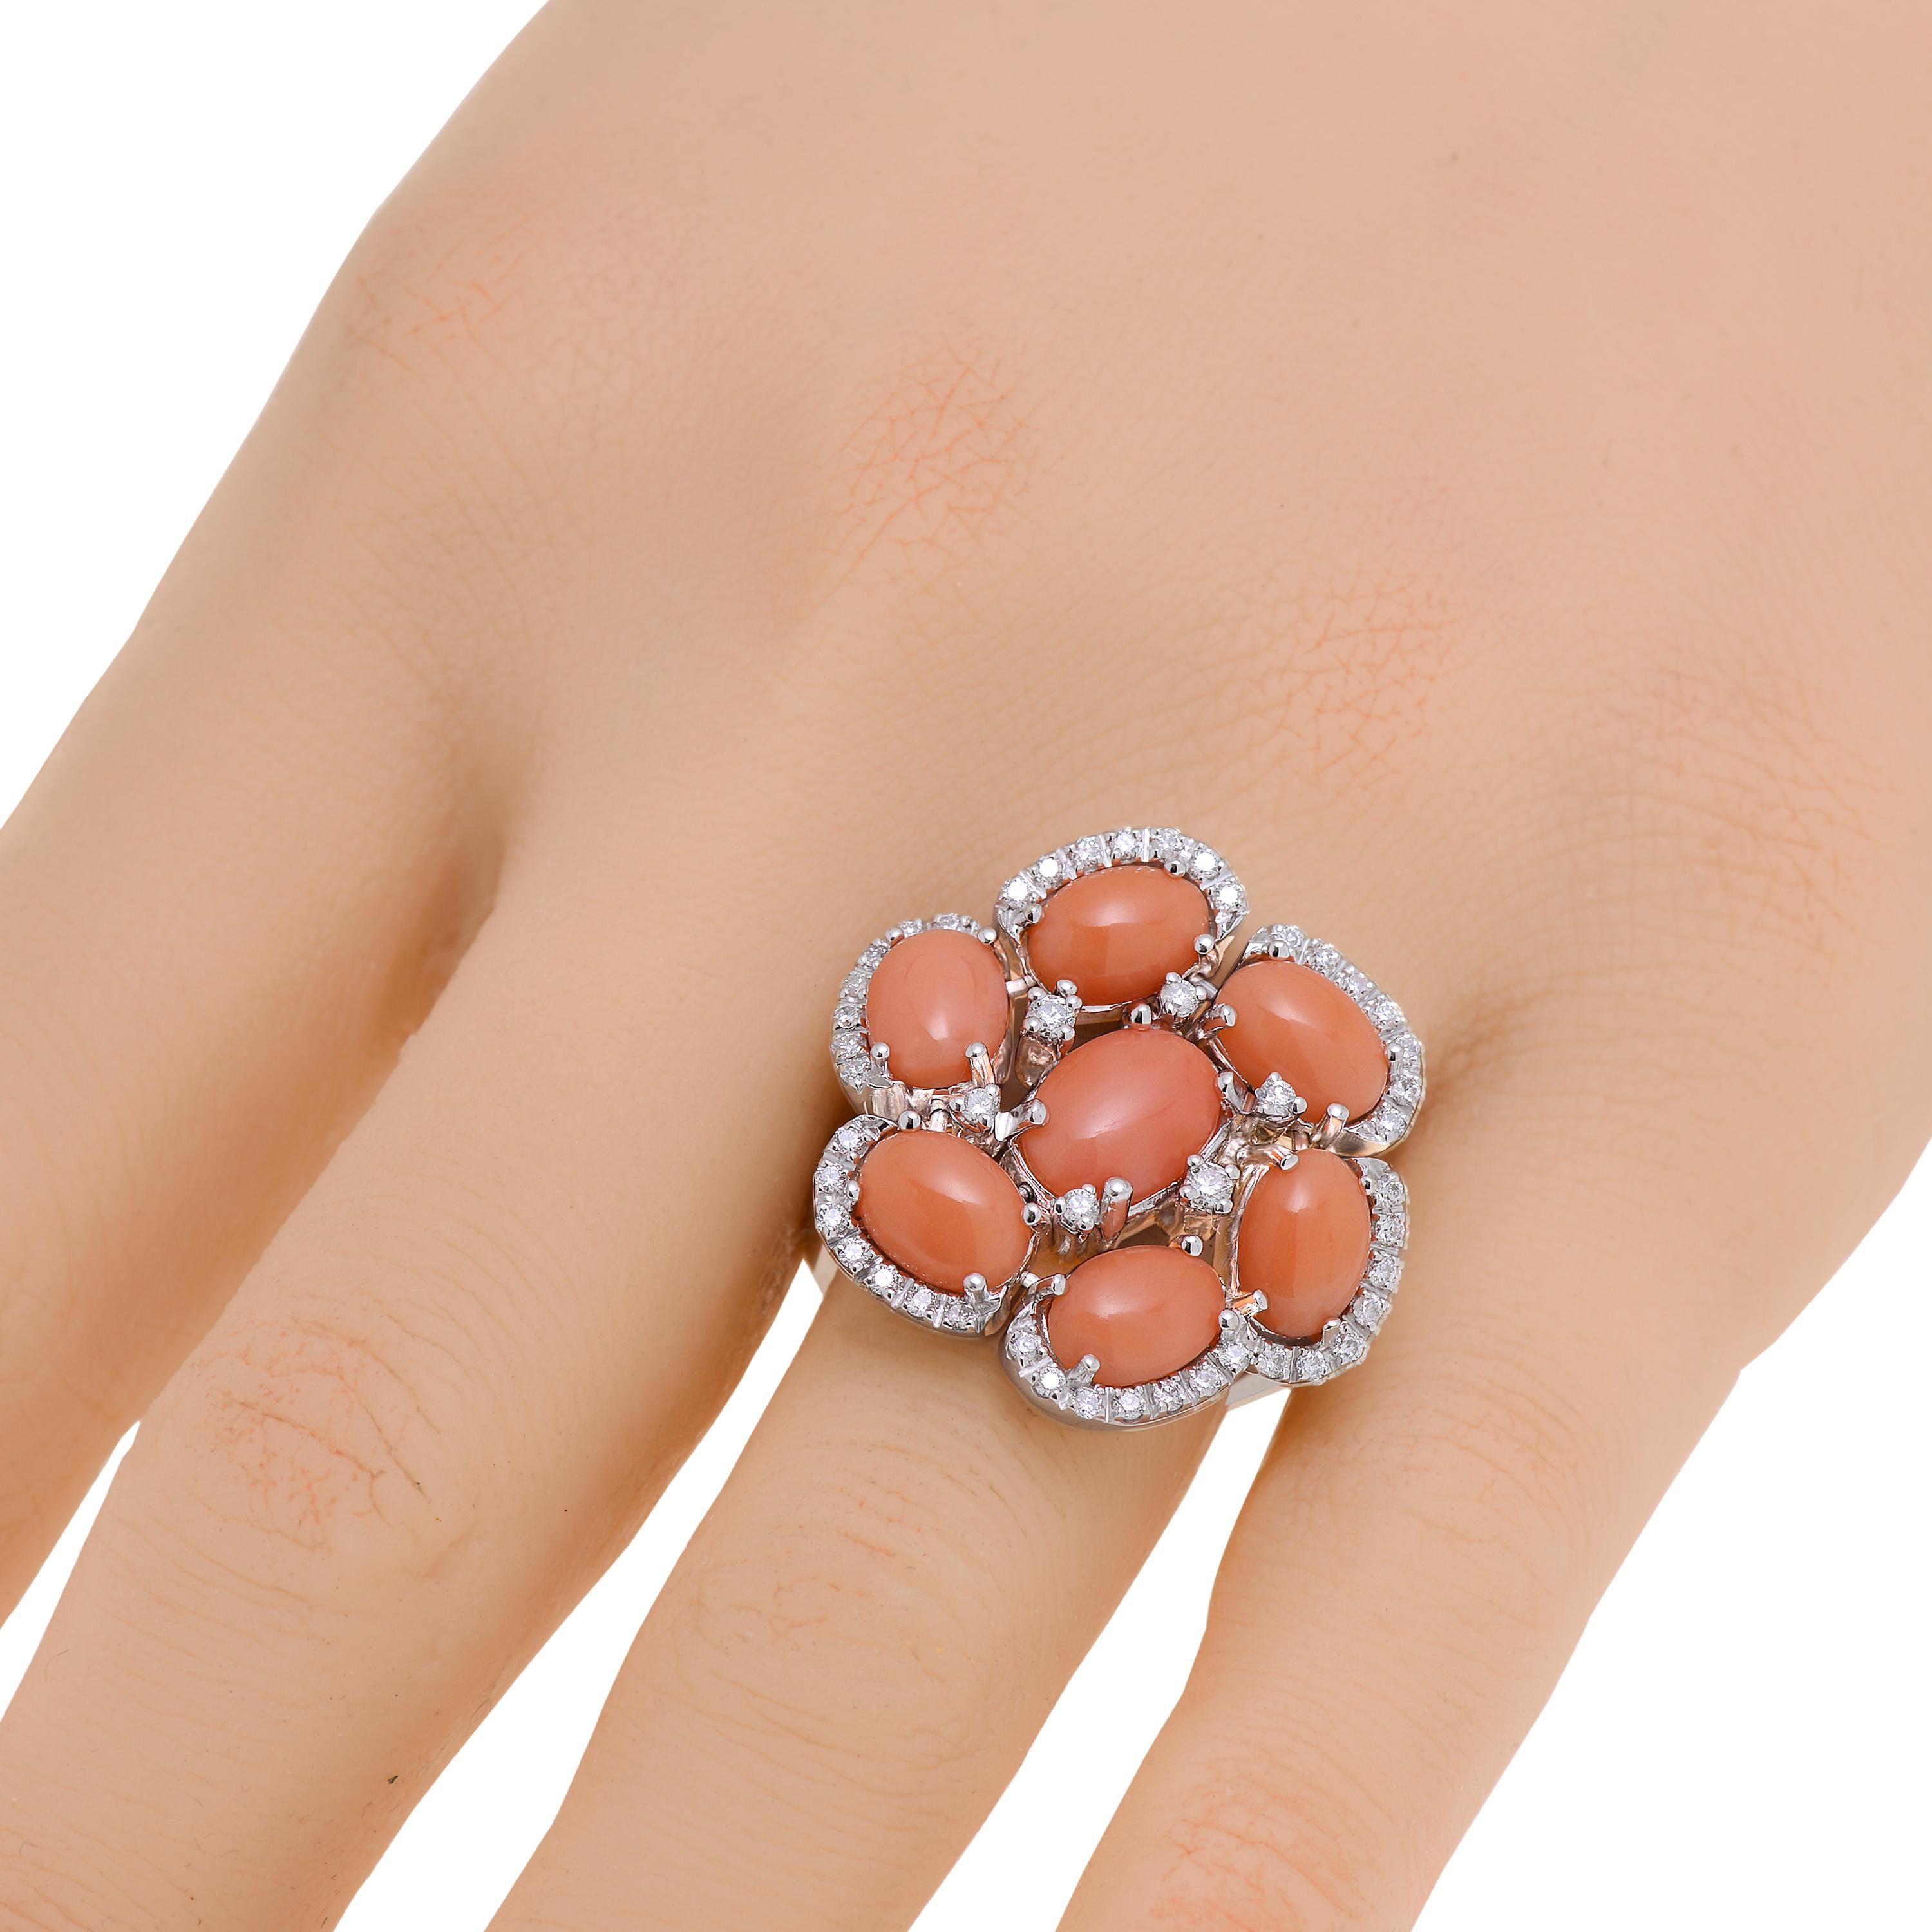 This spectacular Zydo 18K White Gold Statement Ring features seven festive Coral petals 3.26ct. tw. enhanced with glimmering accent diamonds and pave (0.50ct twd). Sticking to company traditions since its' foundation, Zydo Jewelry uses only the